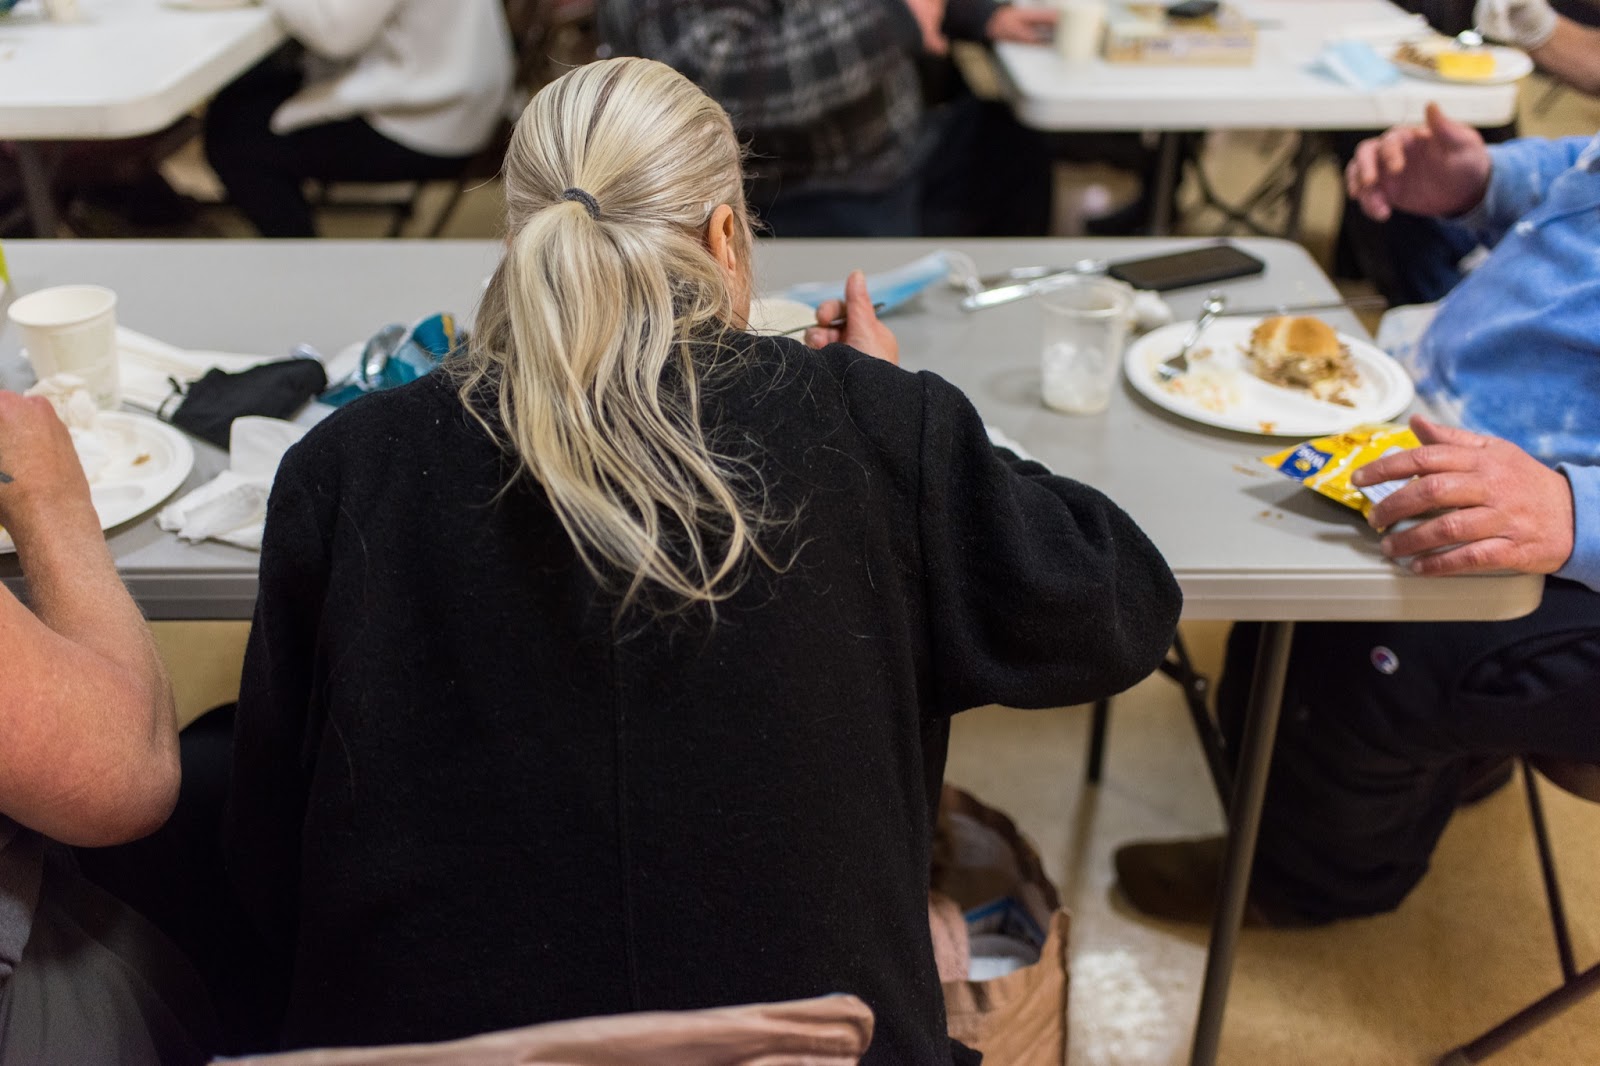 The back of a person with a long ponytail, sitting at a folding table eating.